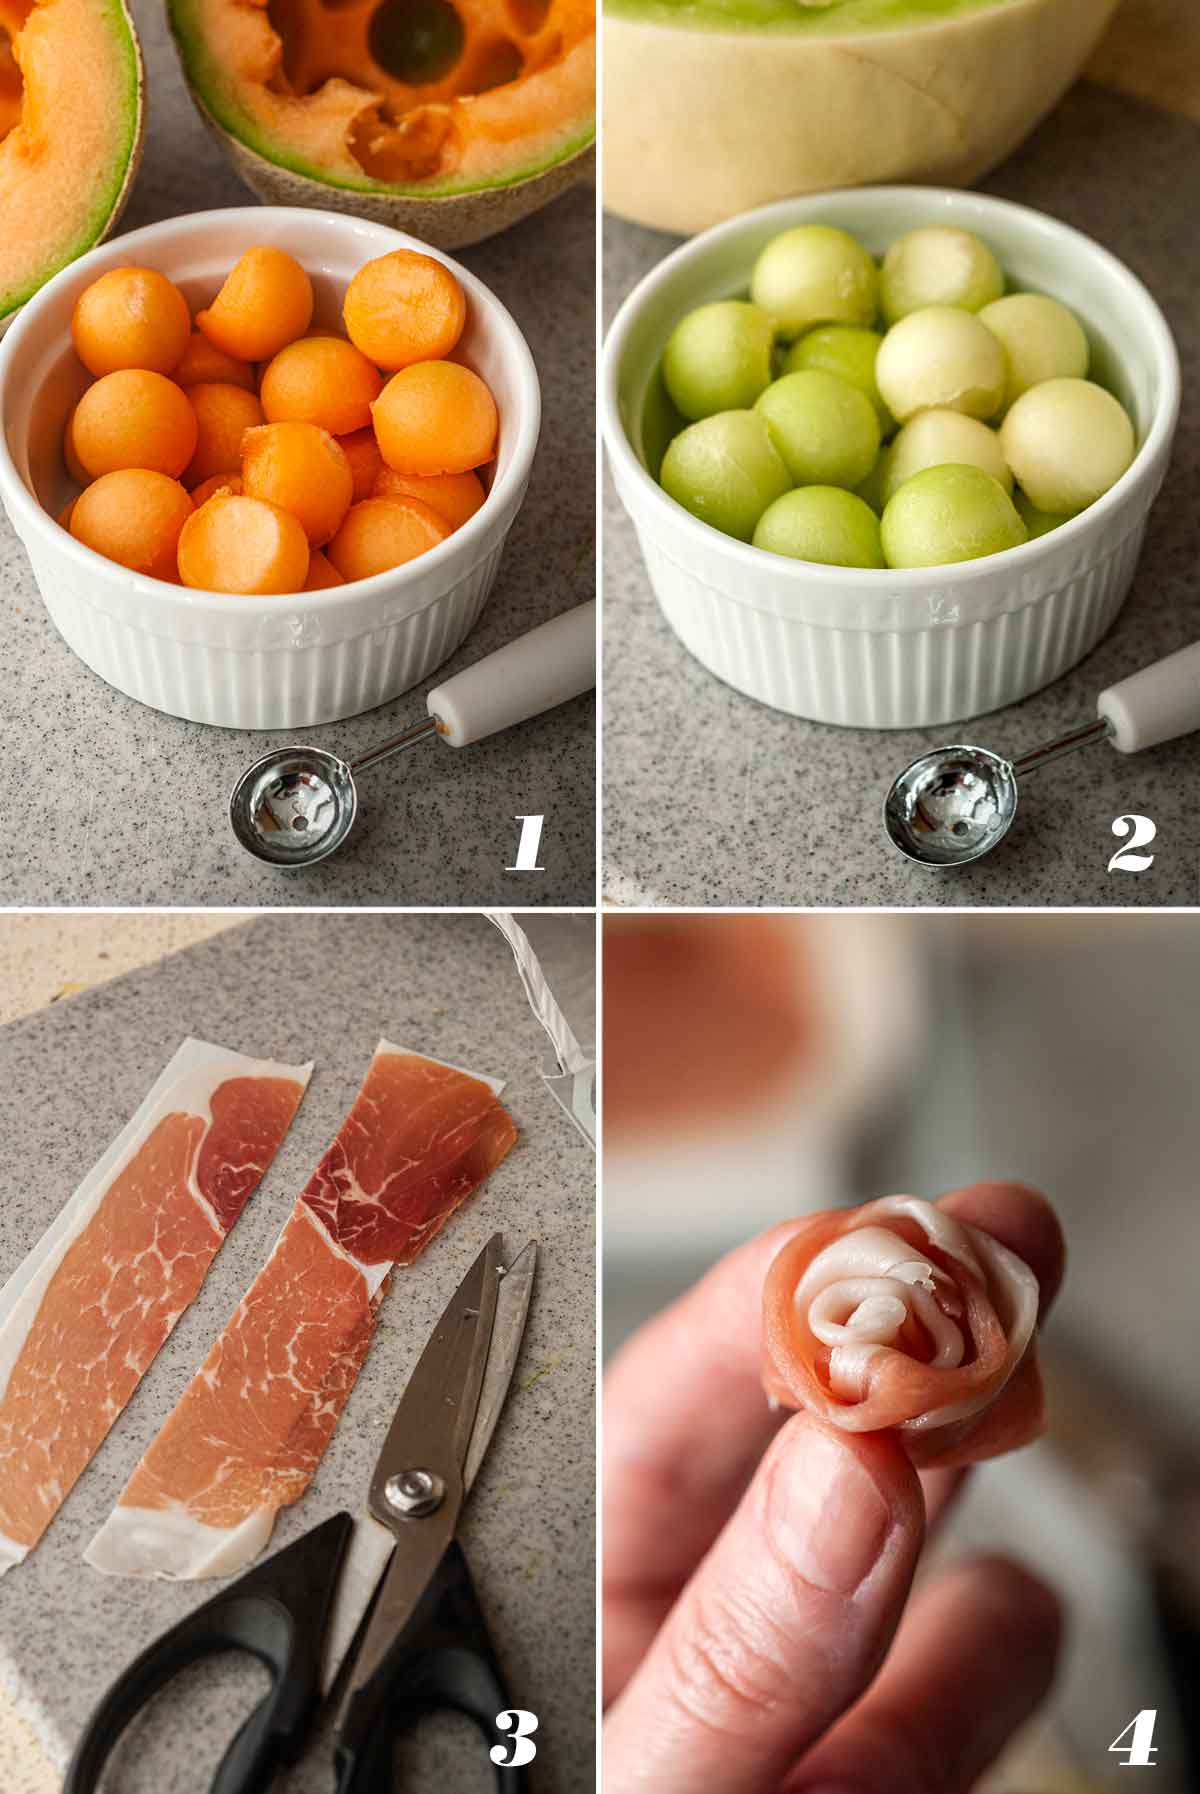 A collage of 4 numbered images showing how to prep ingredients for melon skewers.